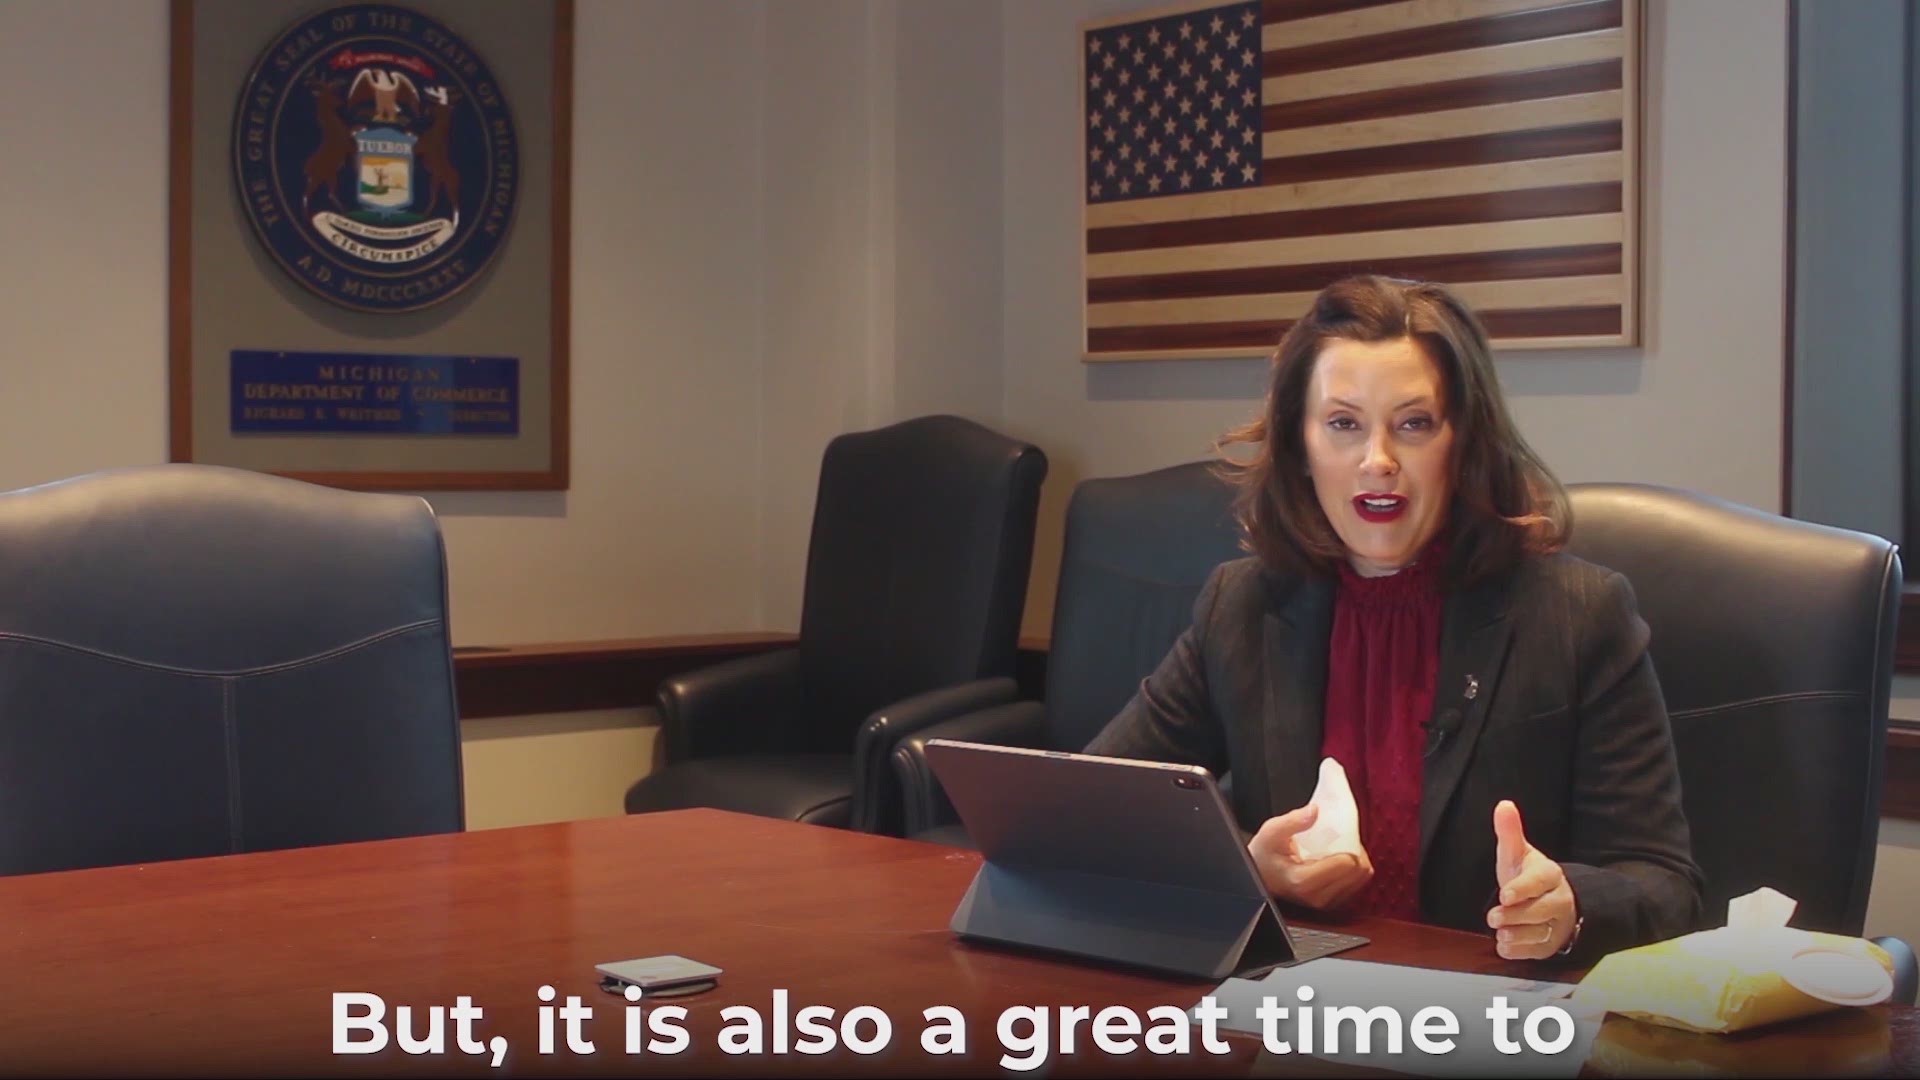 Gov. Gretchen Whitmer is hoping to promote awareness for the 2020 census and encourage citizens to fill out the census.